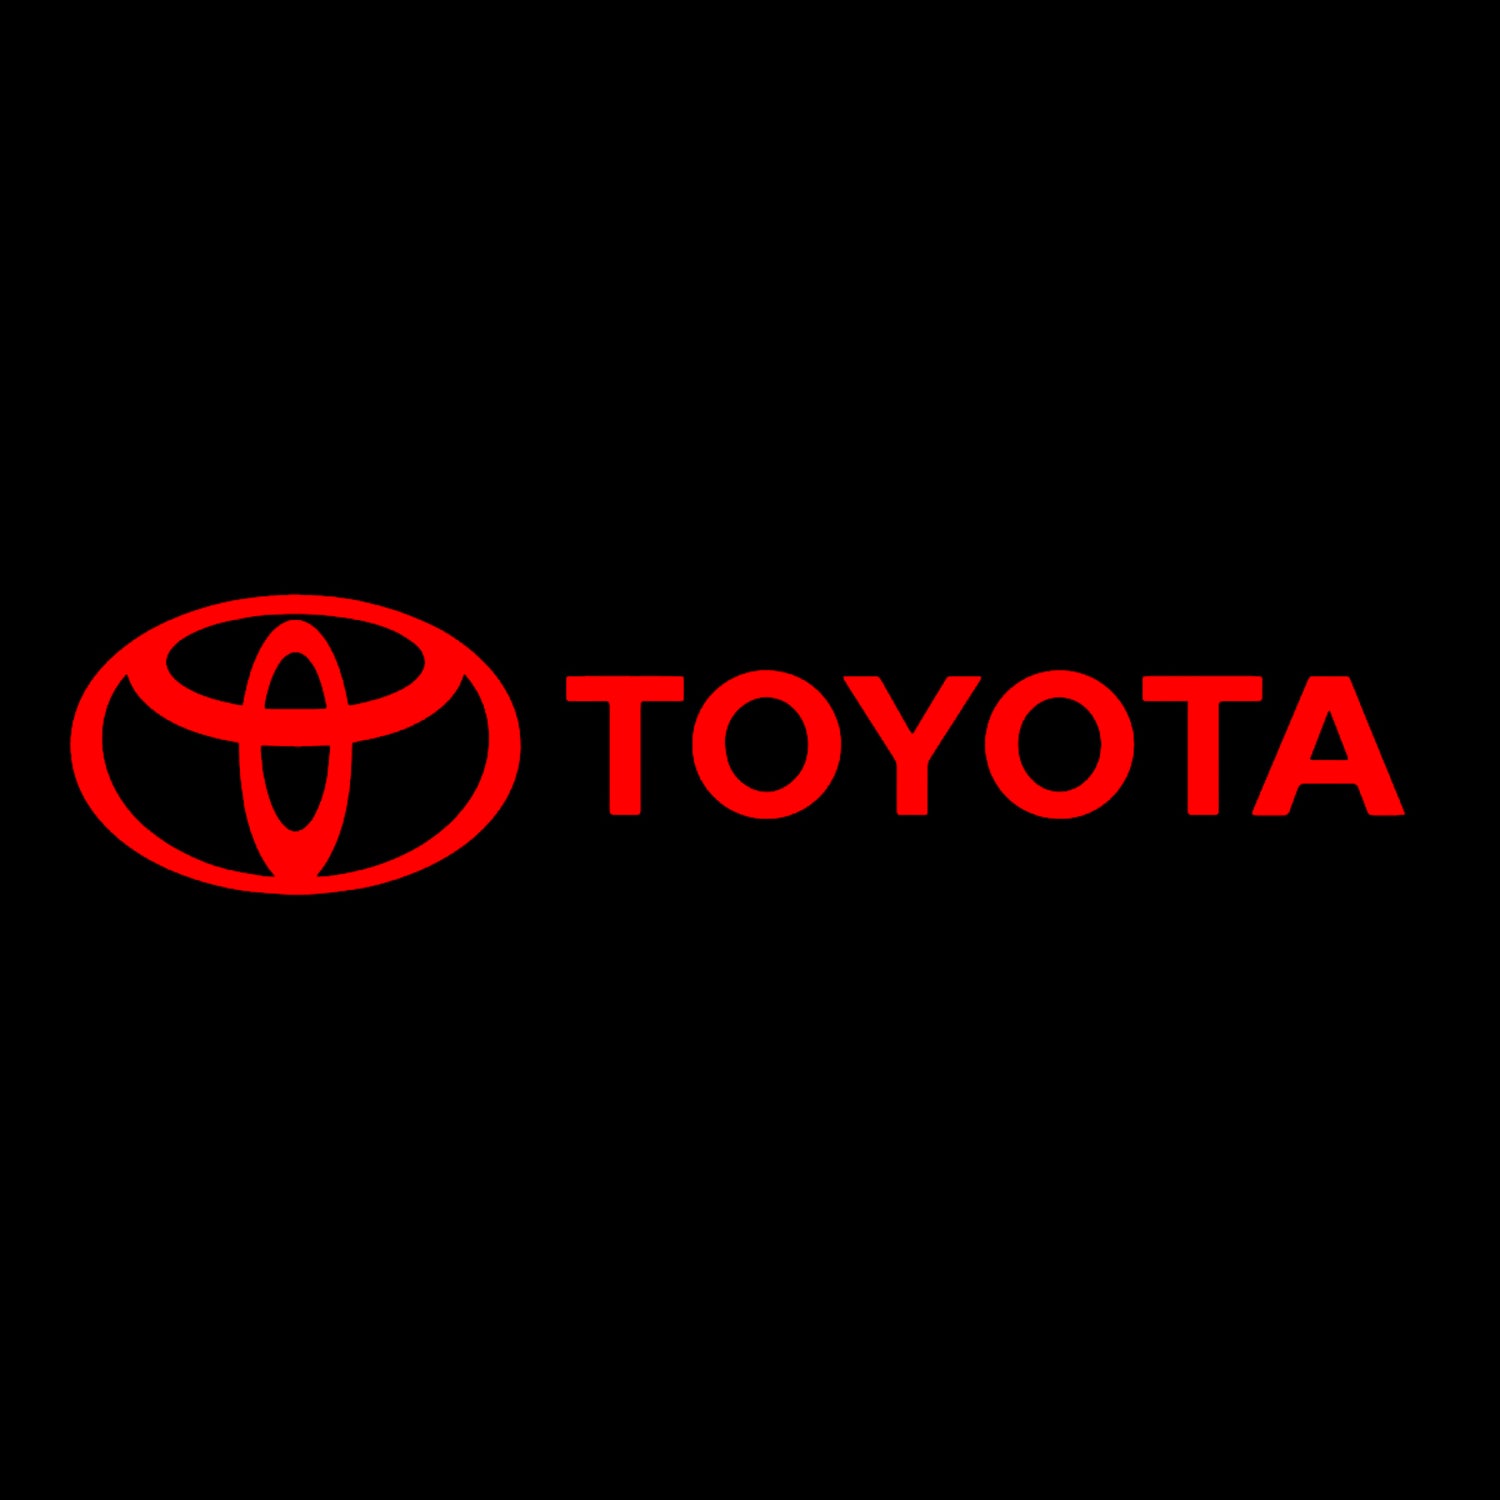 Toyota Logo in red with black background